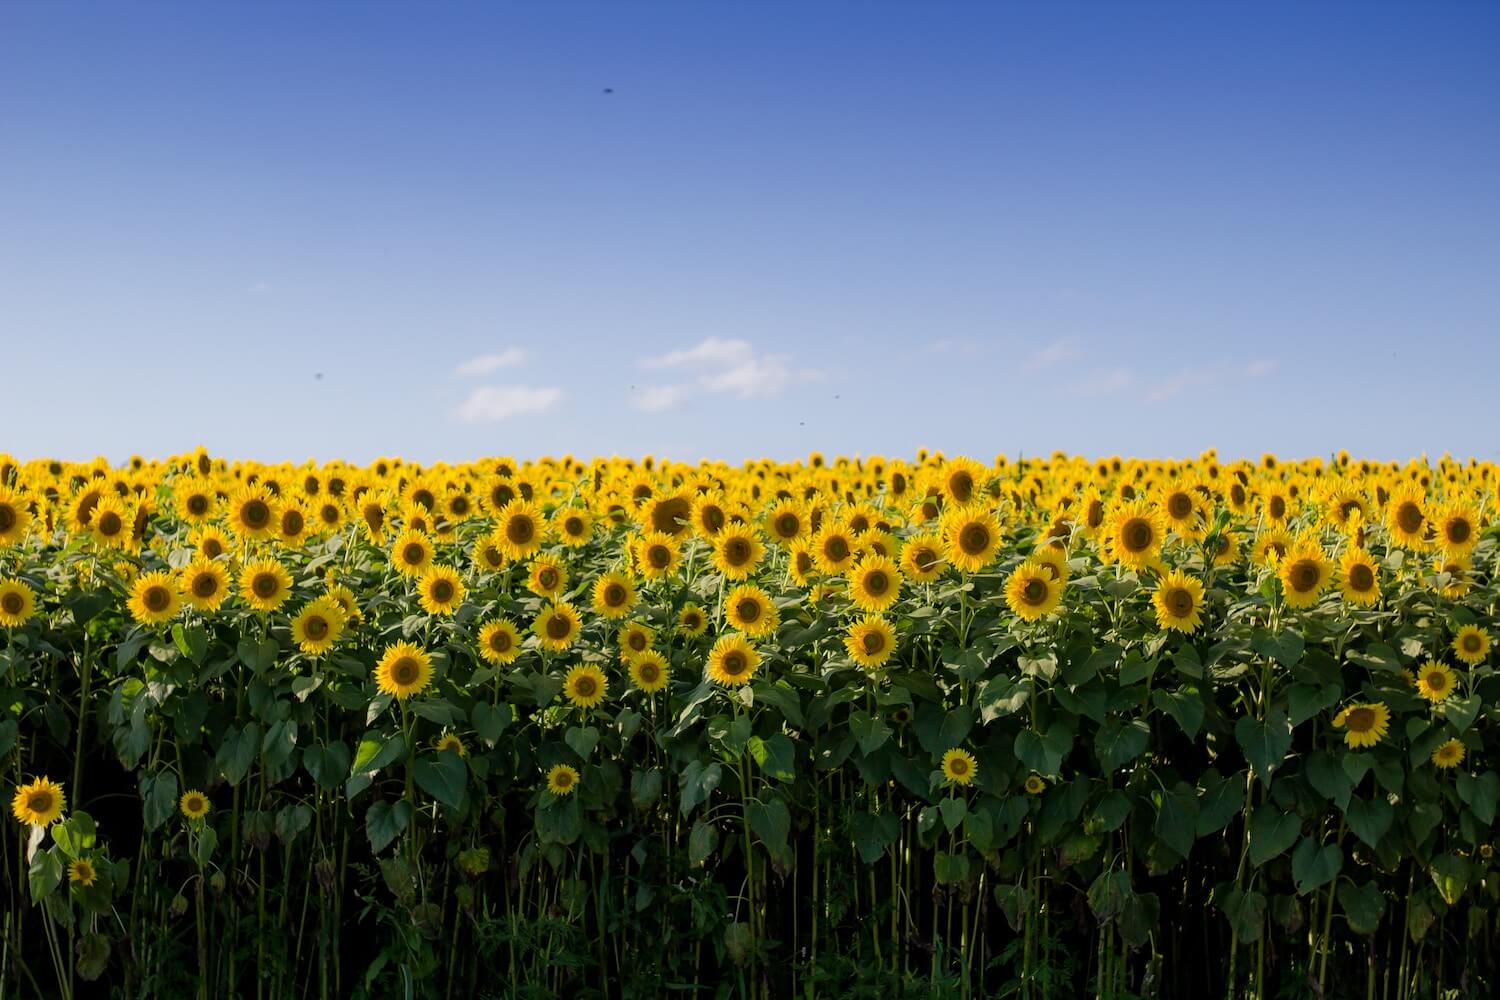 Let's be like sunflowers by Rosalyn Palmer